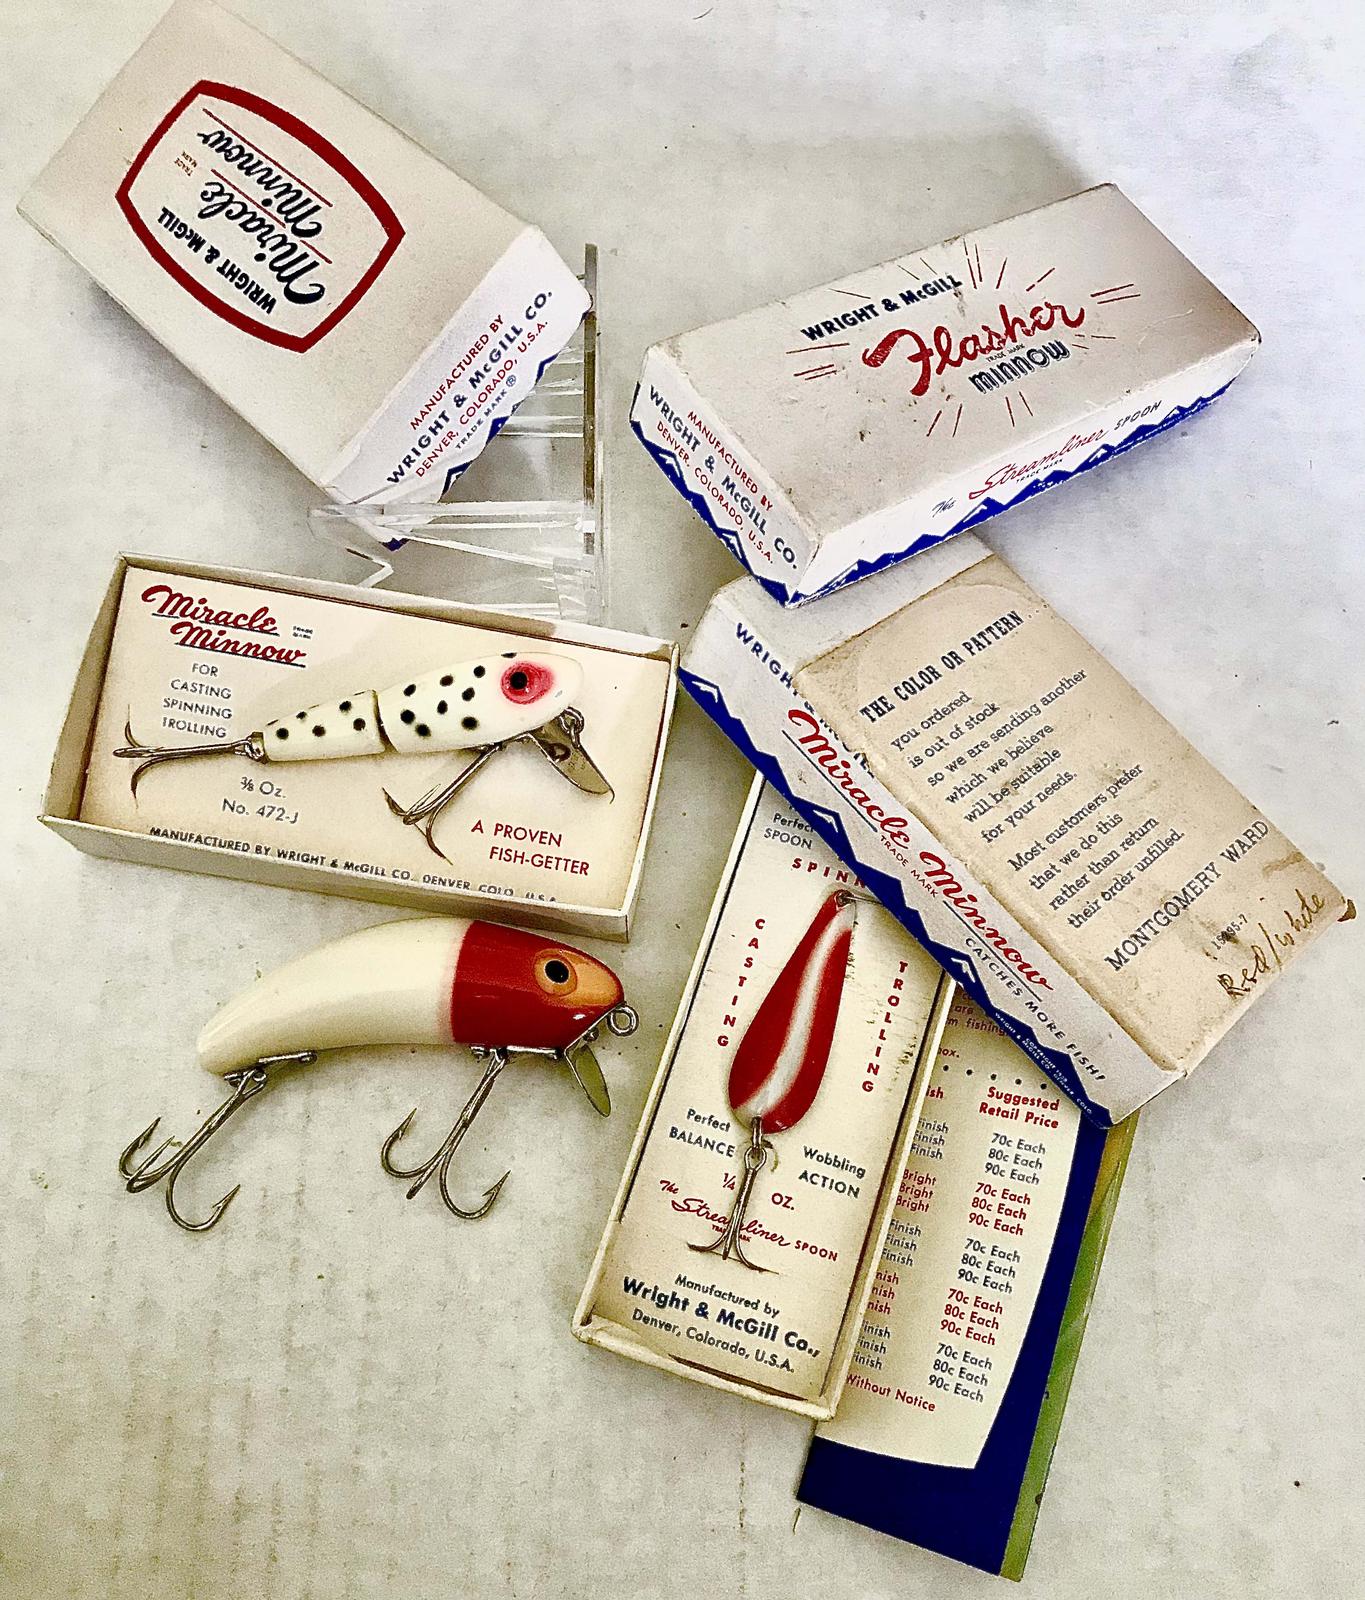 Vintage fishing lures sold at auction on 2nd March